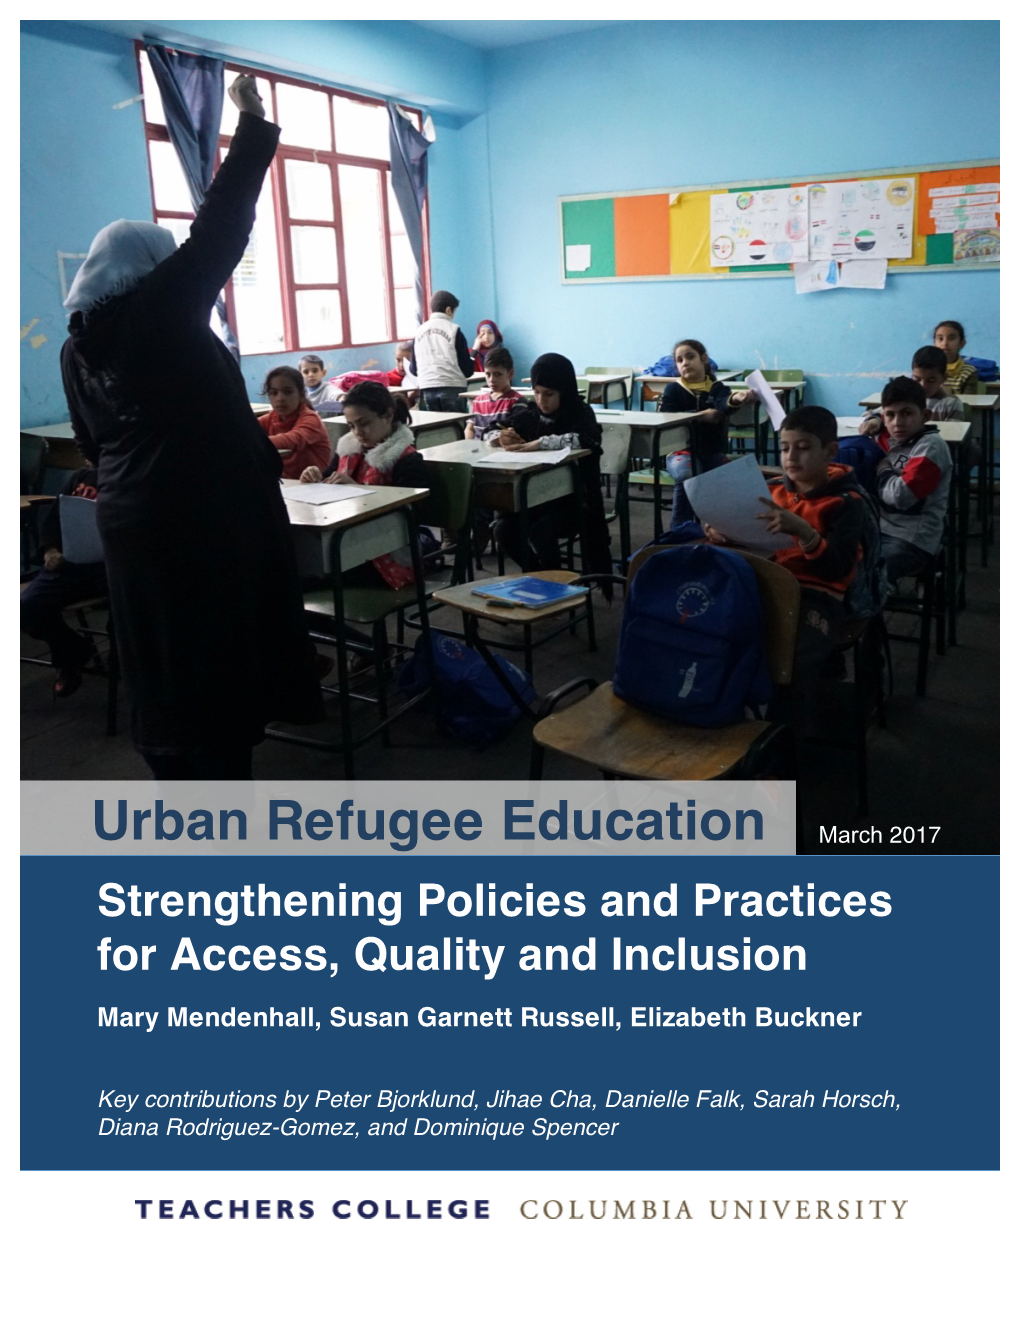 Urban Refugee Education March 2017 Strengthening Policies and Practices for Access, Quality and Inclusion